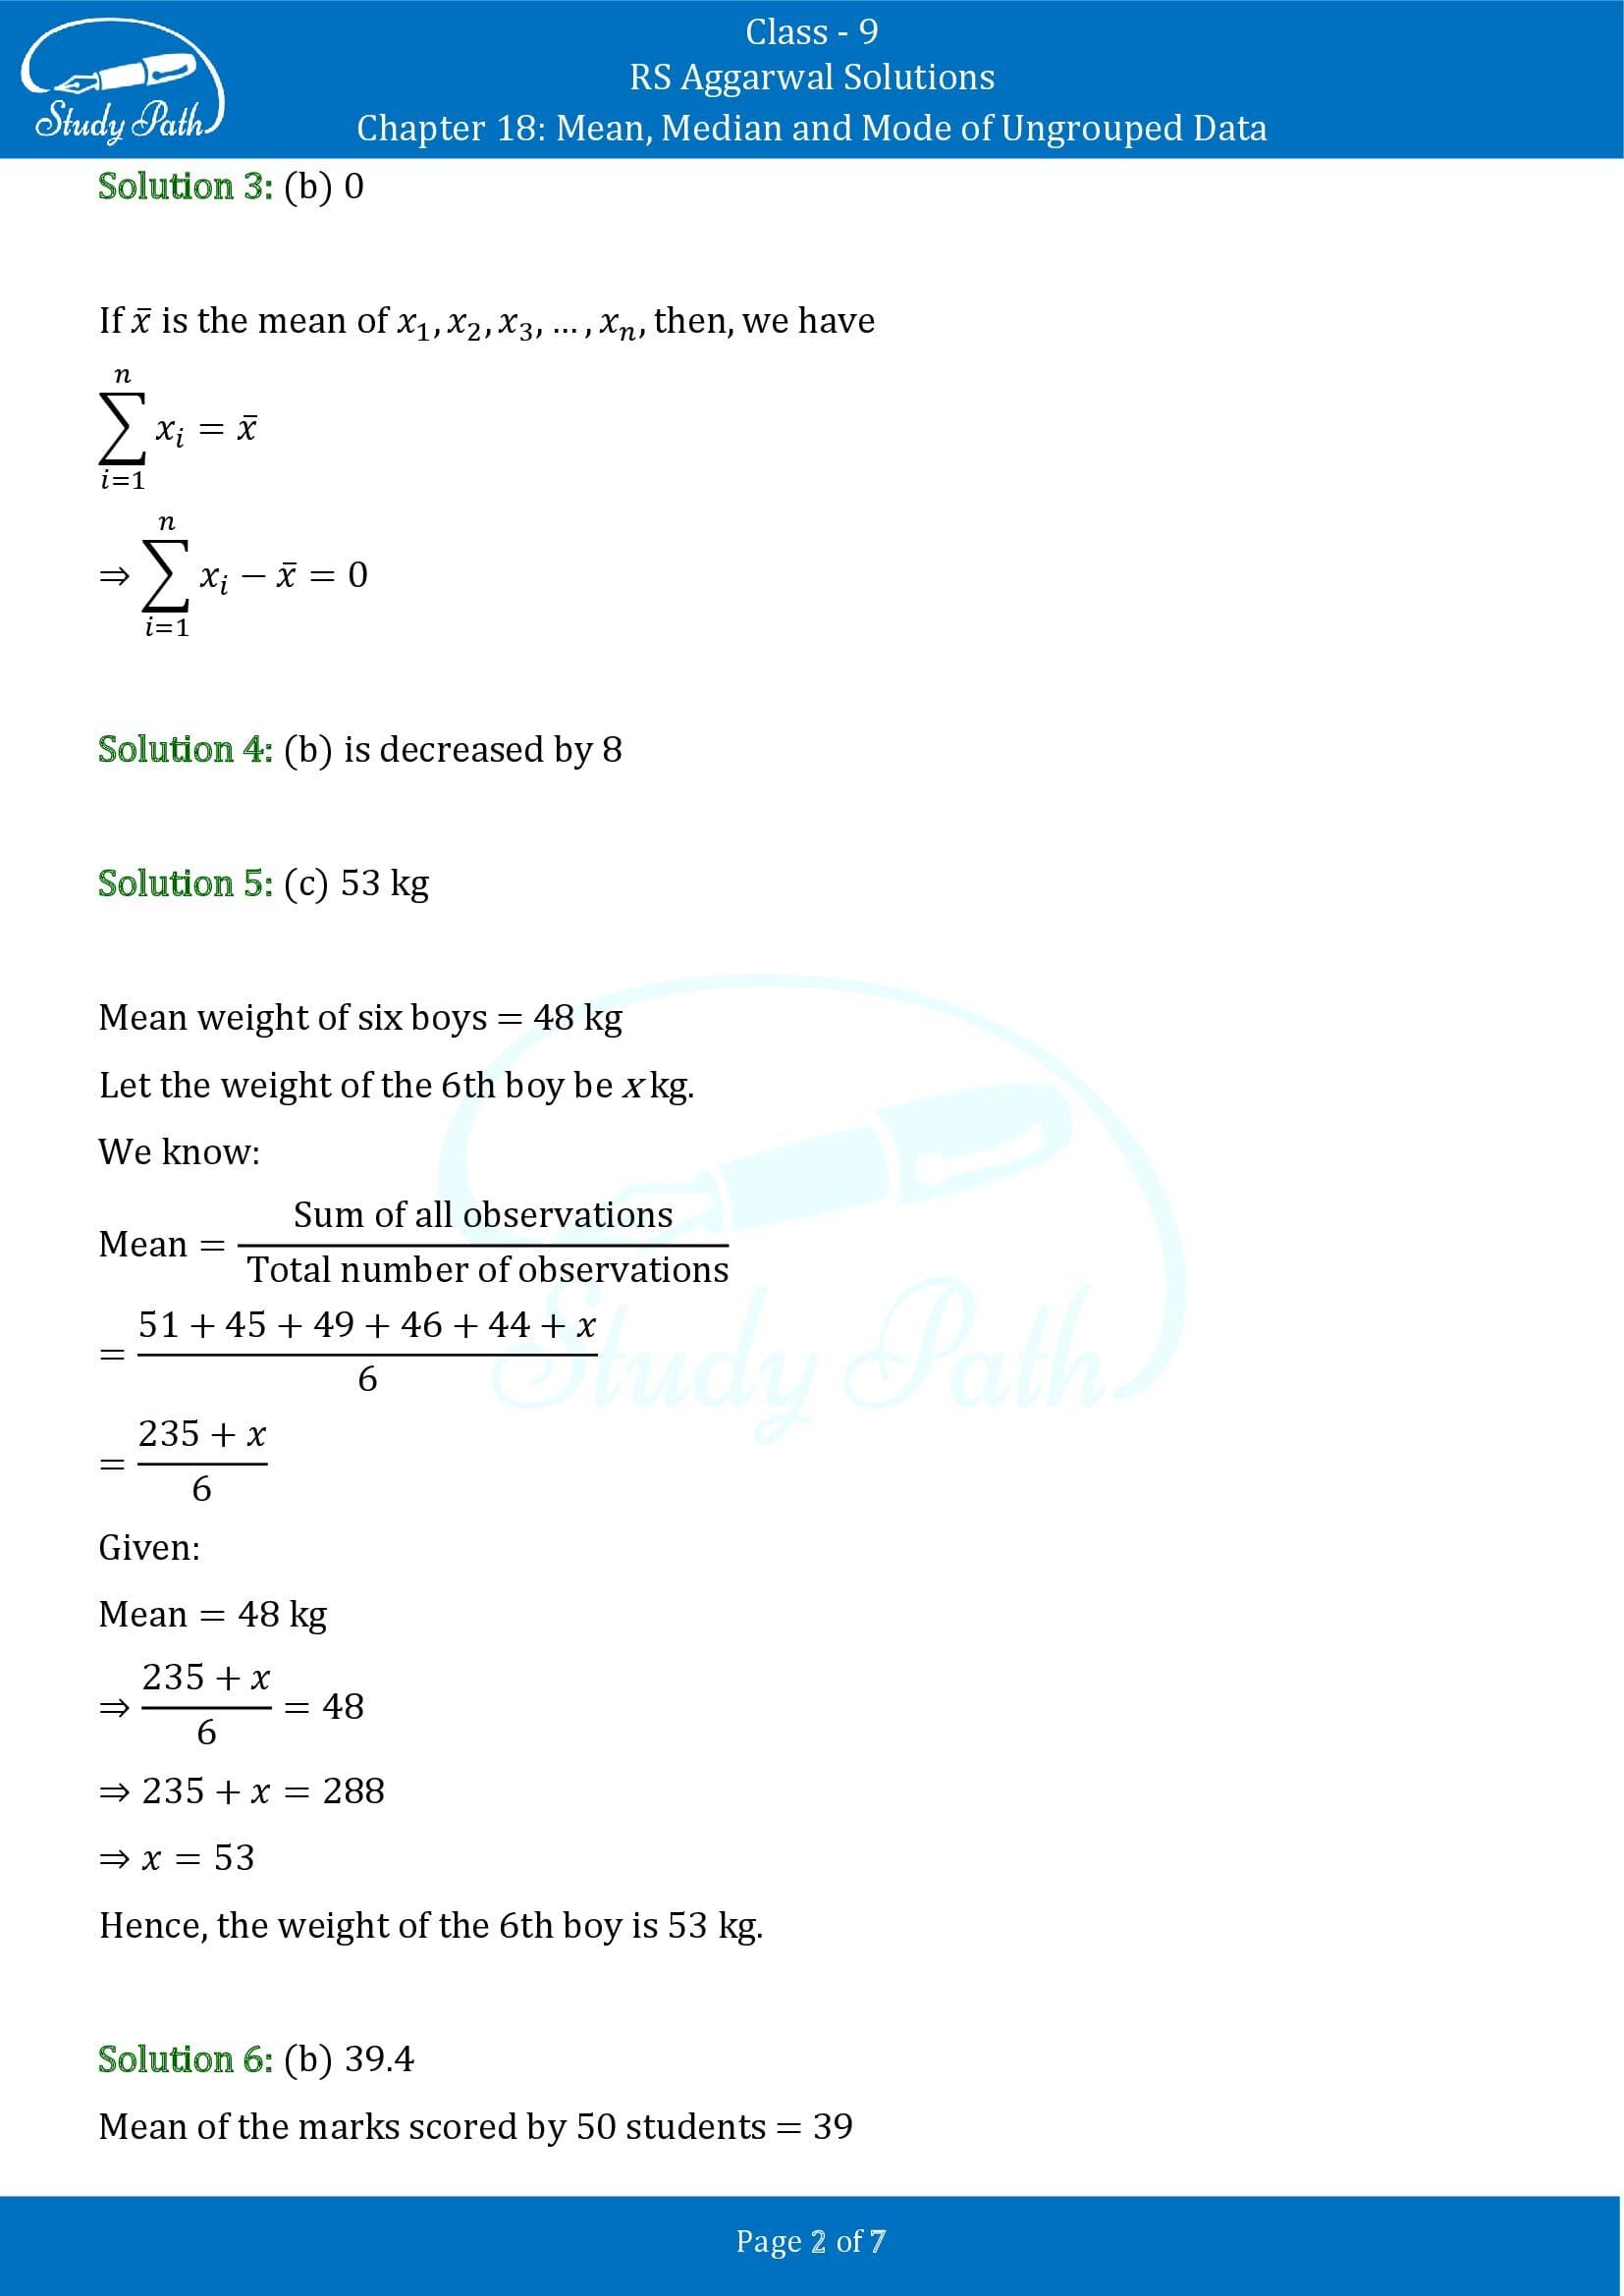 RS Aggarwal Solutions Class 9 Chapter 18 Mean Median and Mode of Ungrouped Data Multiple Choice Questions MCQs 00002